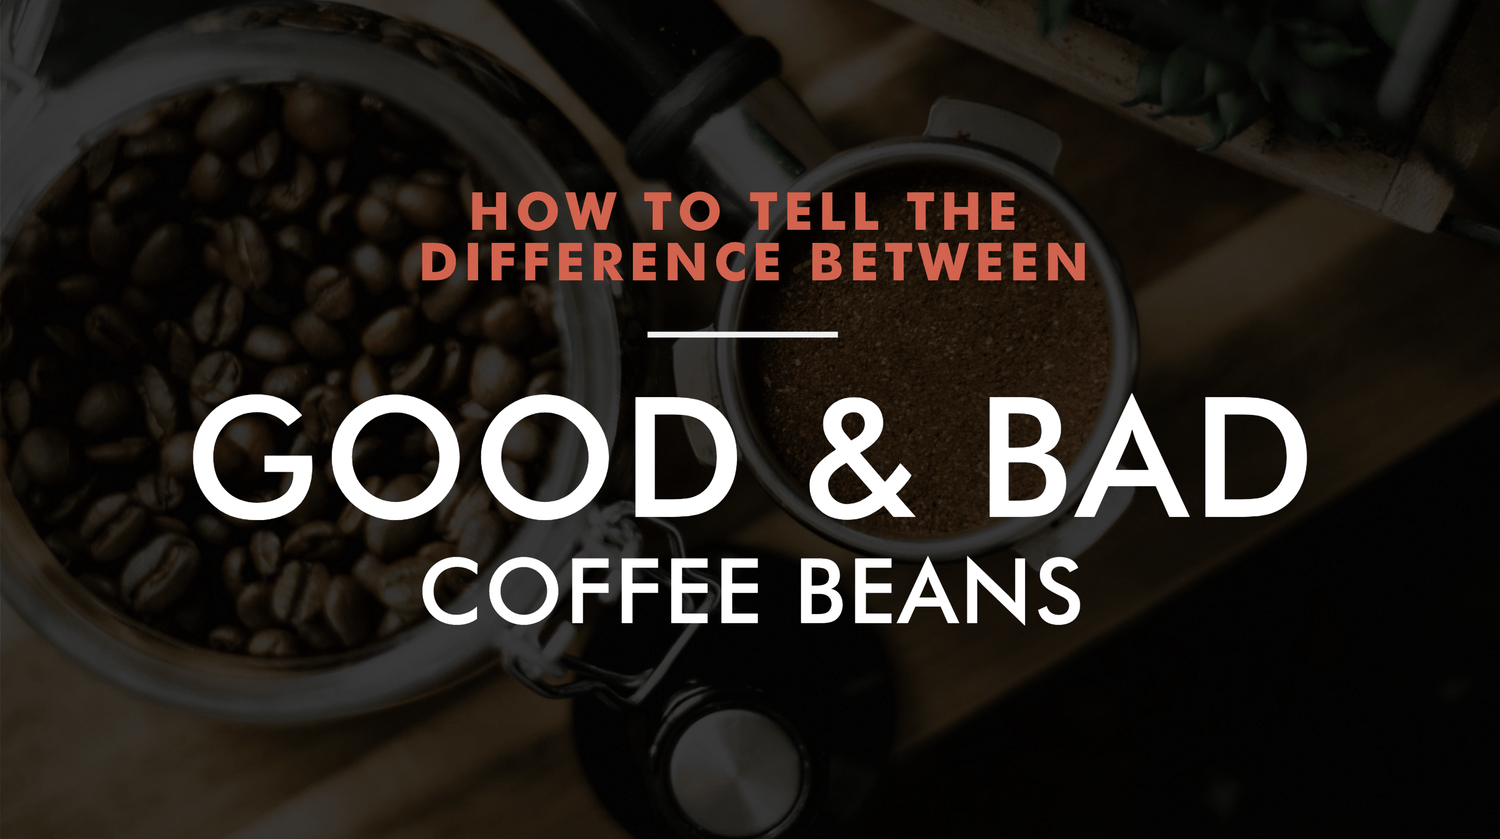 How To Tell The Difference Between Good & Bad Coffee Beans